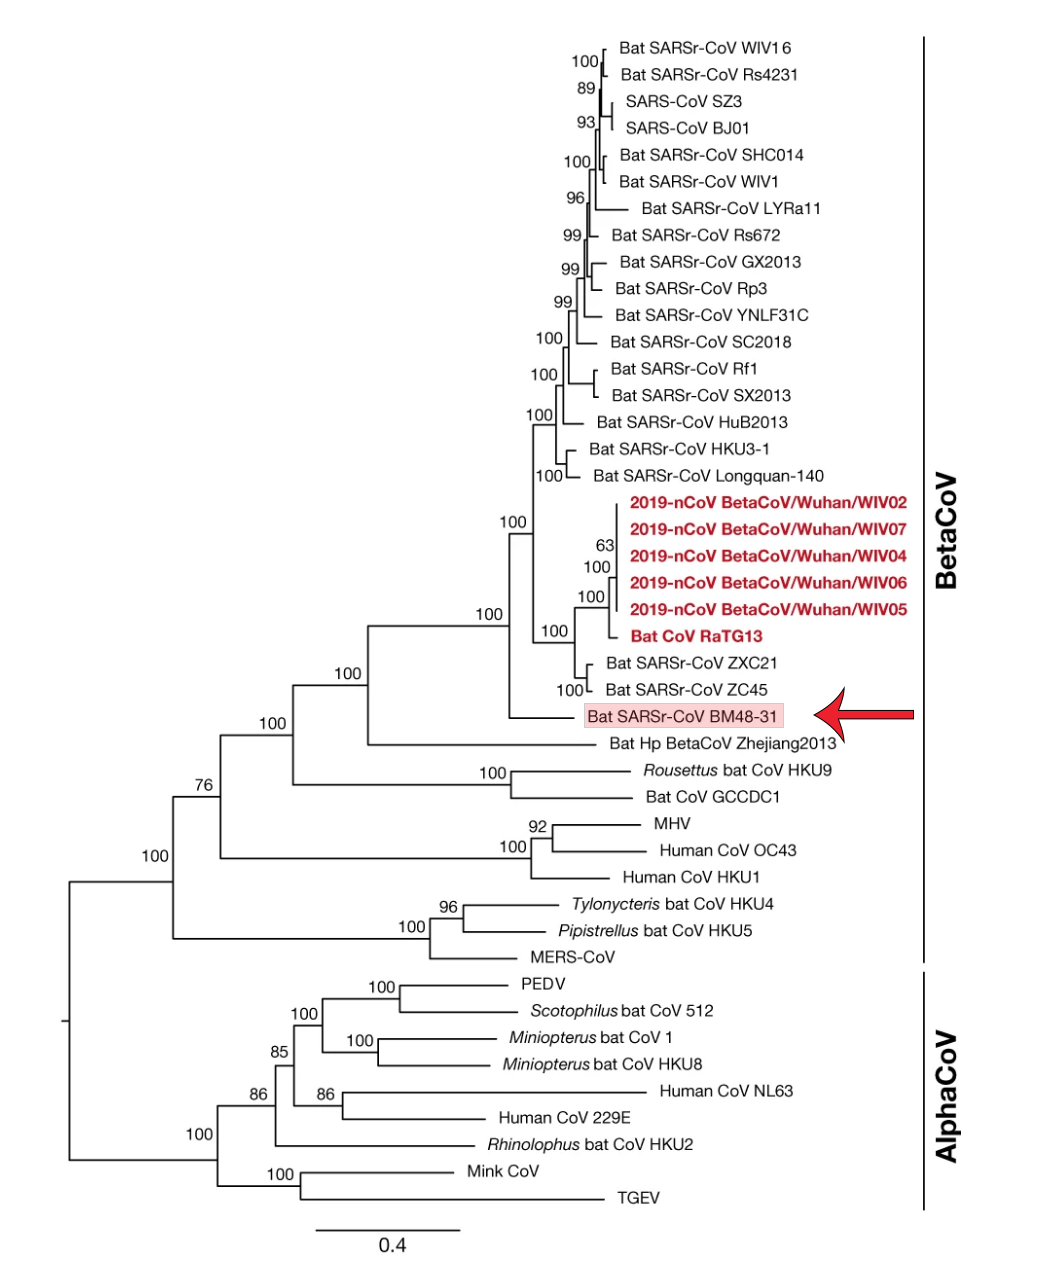 Figure 2 Phylogenetic tree from Zhou et al. (2020) showing the placement of five strains of 2019-nCov (original nomenclature for SARS-CoV-2). The arrow and highlighted name highlight the virus that was chosen as the closest strain by CosmosID automated analysis in the cloud.